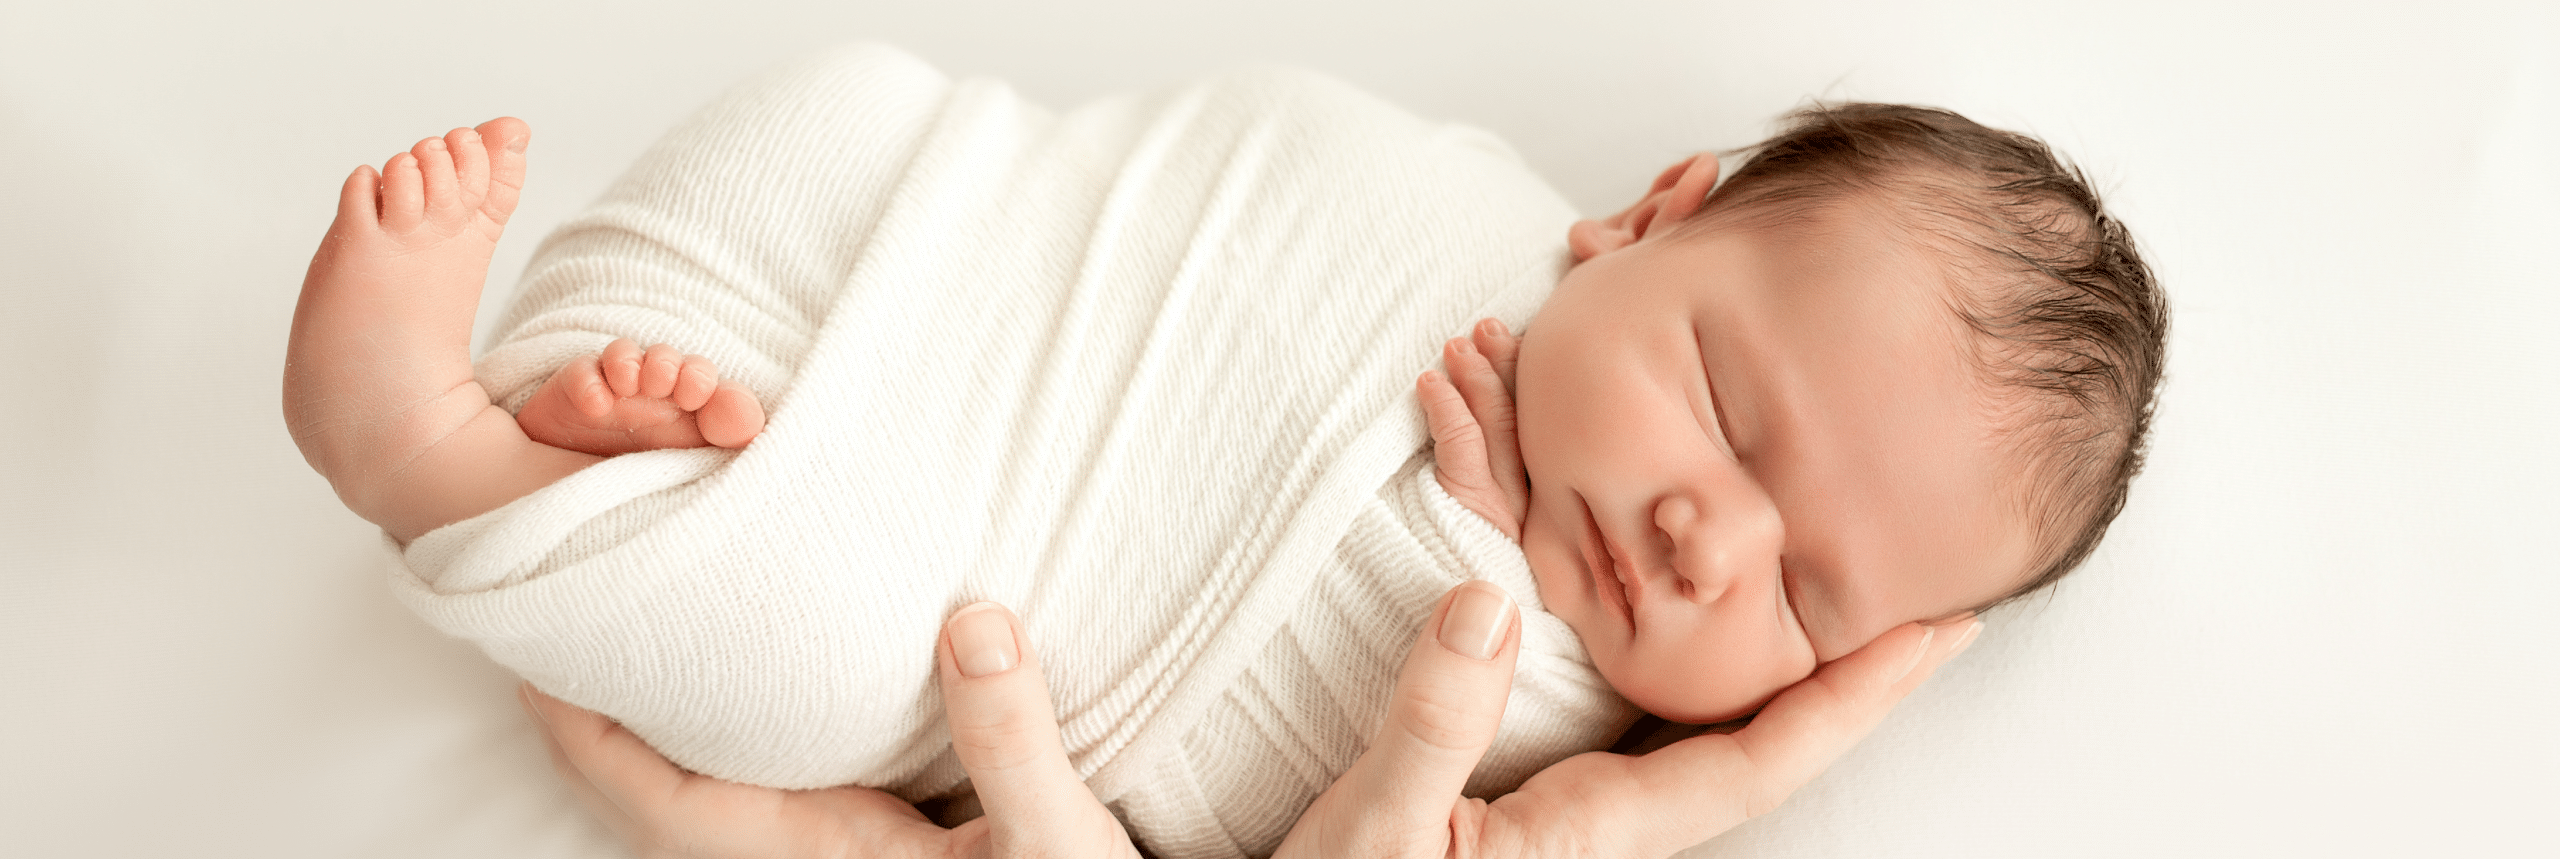 The Incredible Benefits of Swaddling Your Baby for Restful Sleep and Comfort